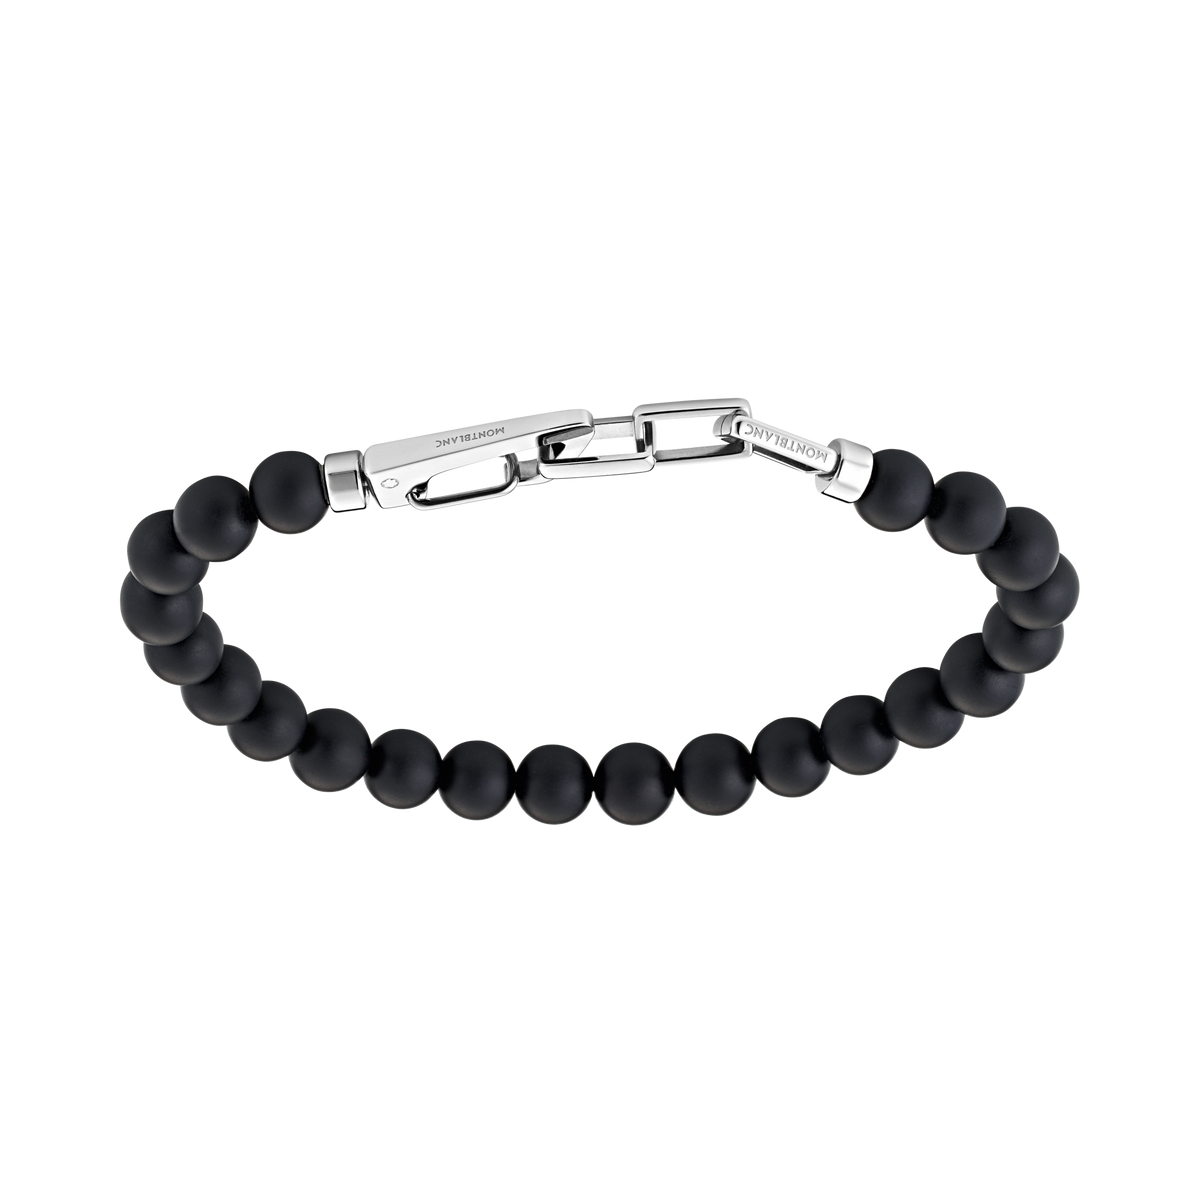 Onyx-bead bracelet with carabiner closure in stainless steel